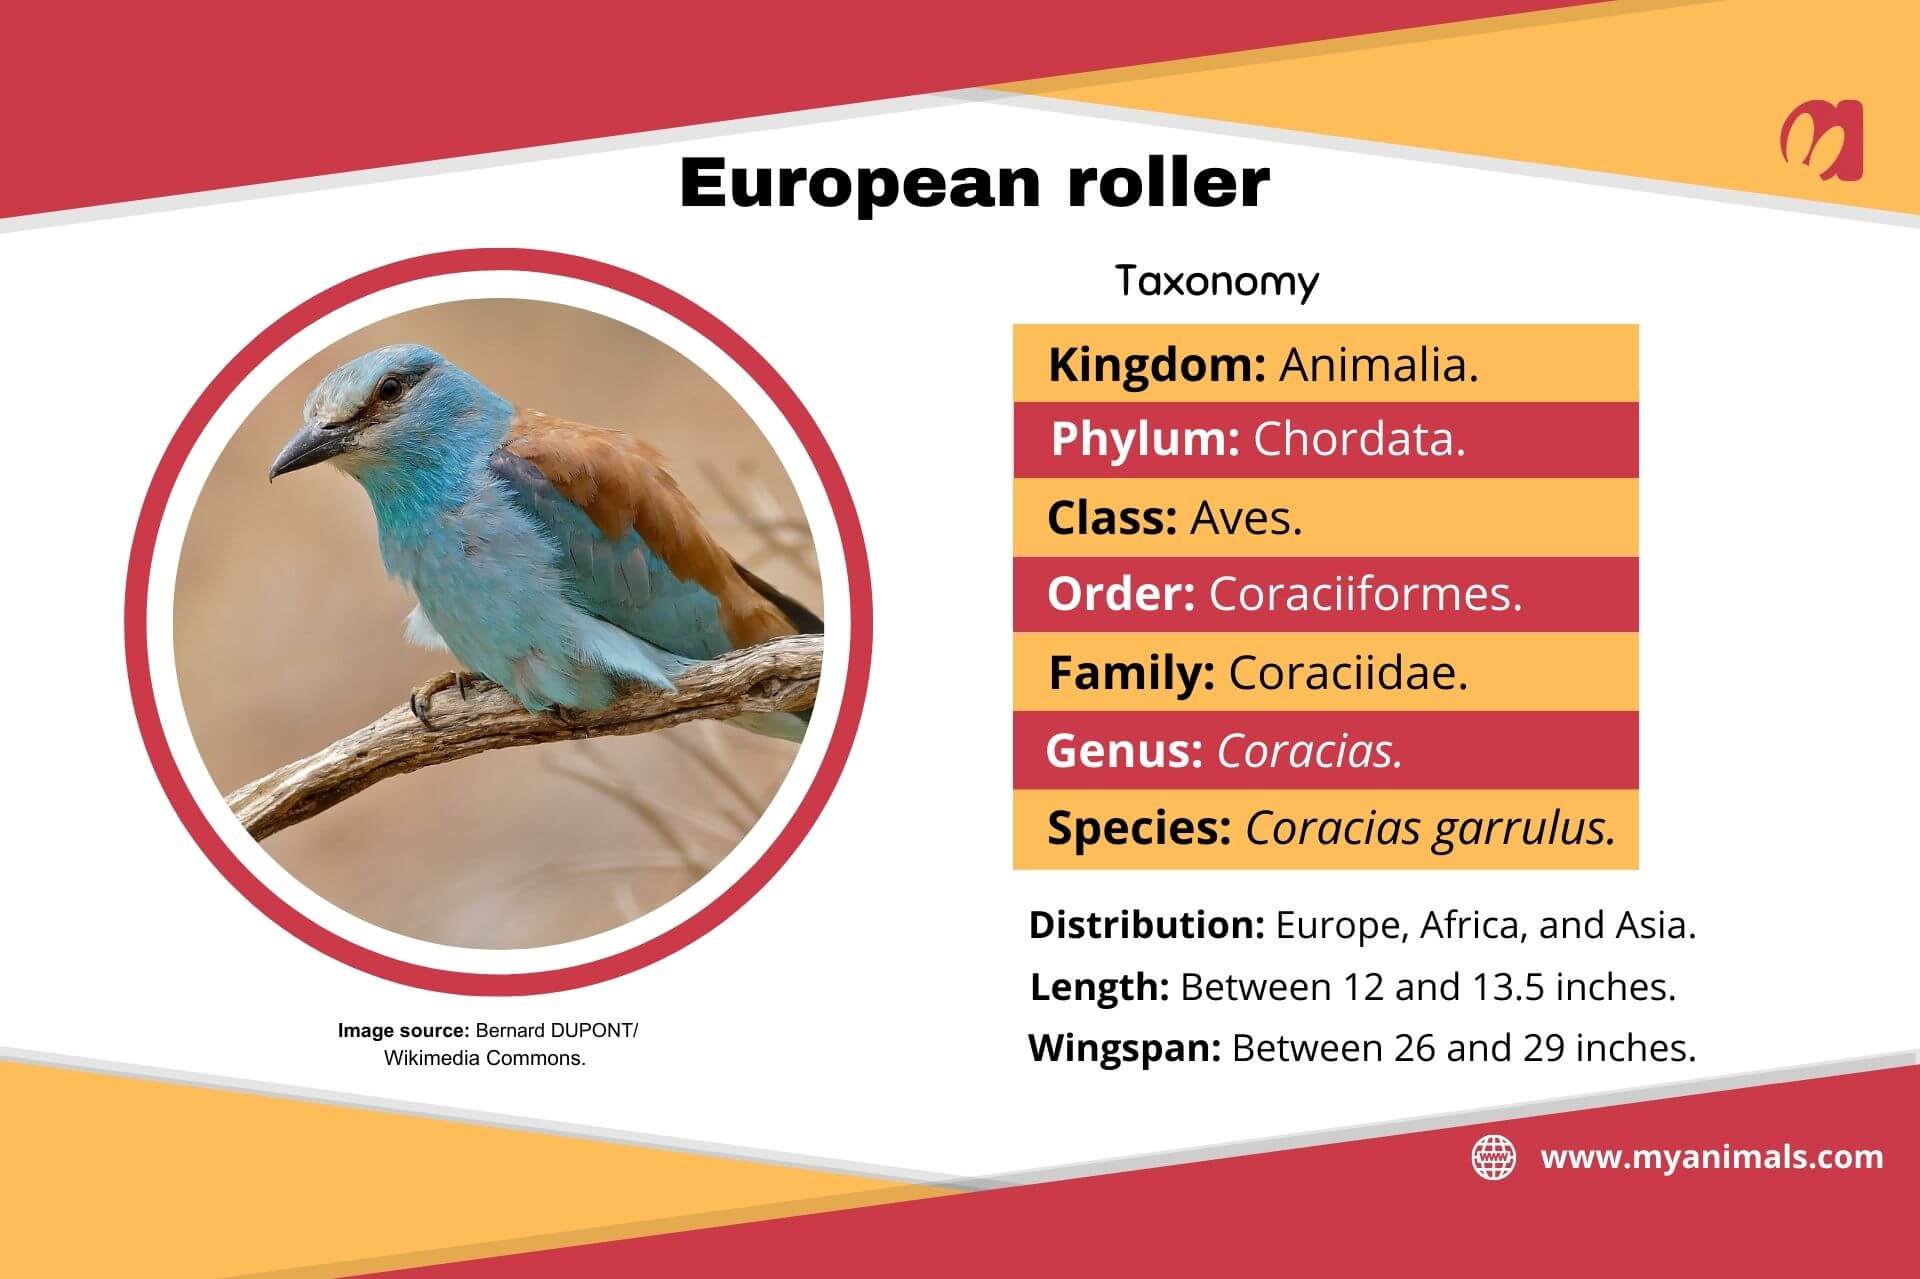 Information on the European roller.